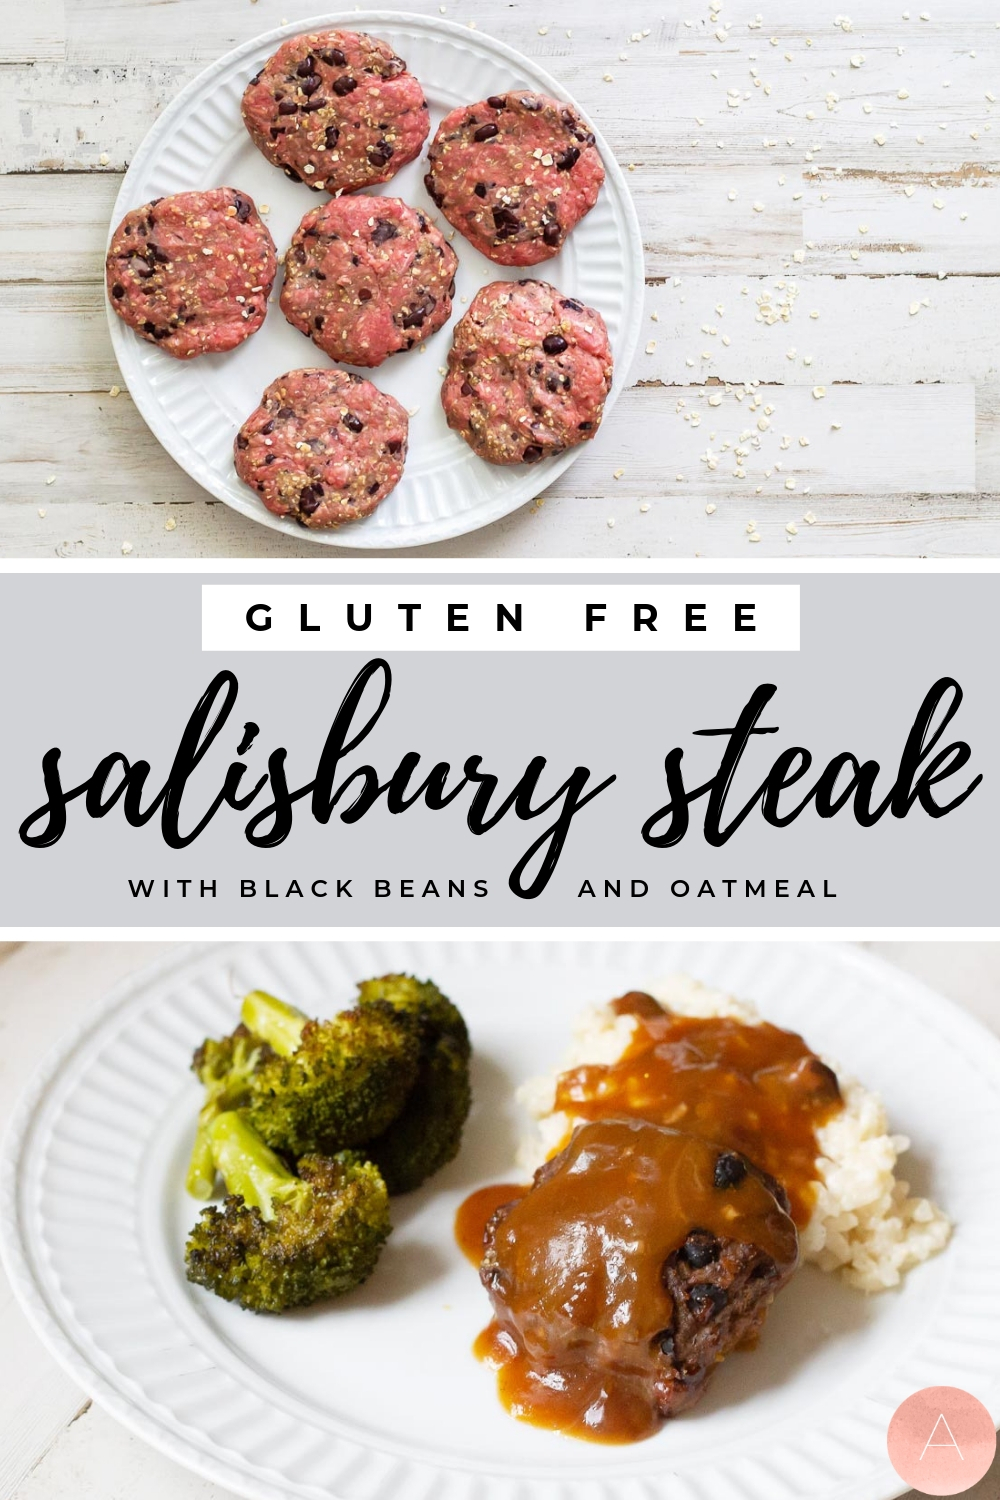 Searching for a healthy salisbury steak recipe? Search no more. This recipe features lean ground beef, black beans, oatmeal, and gluten free gravy for a nutritious and tender dinner that the whole family will love. #glutenfreerecipes #healthymeals #easydinners #easyhealthyrecipes